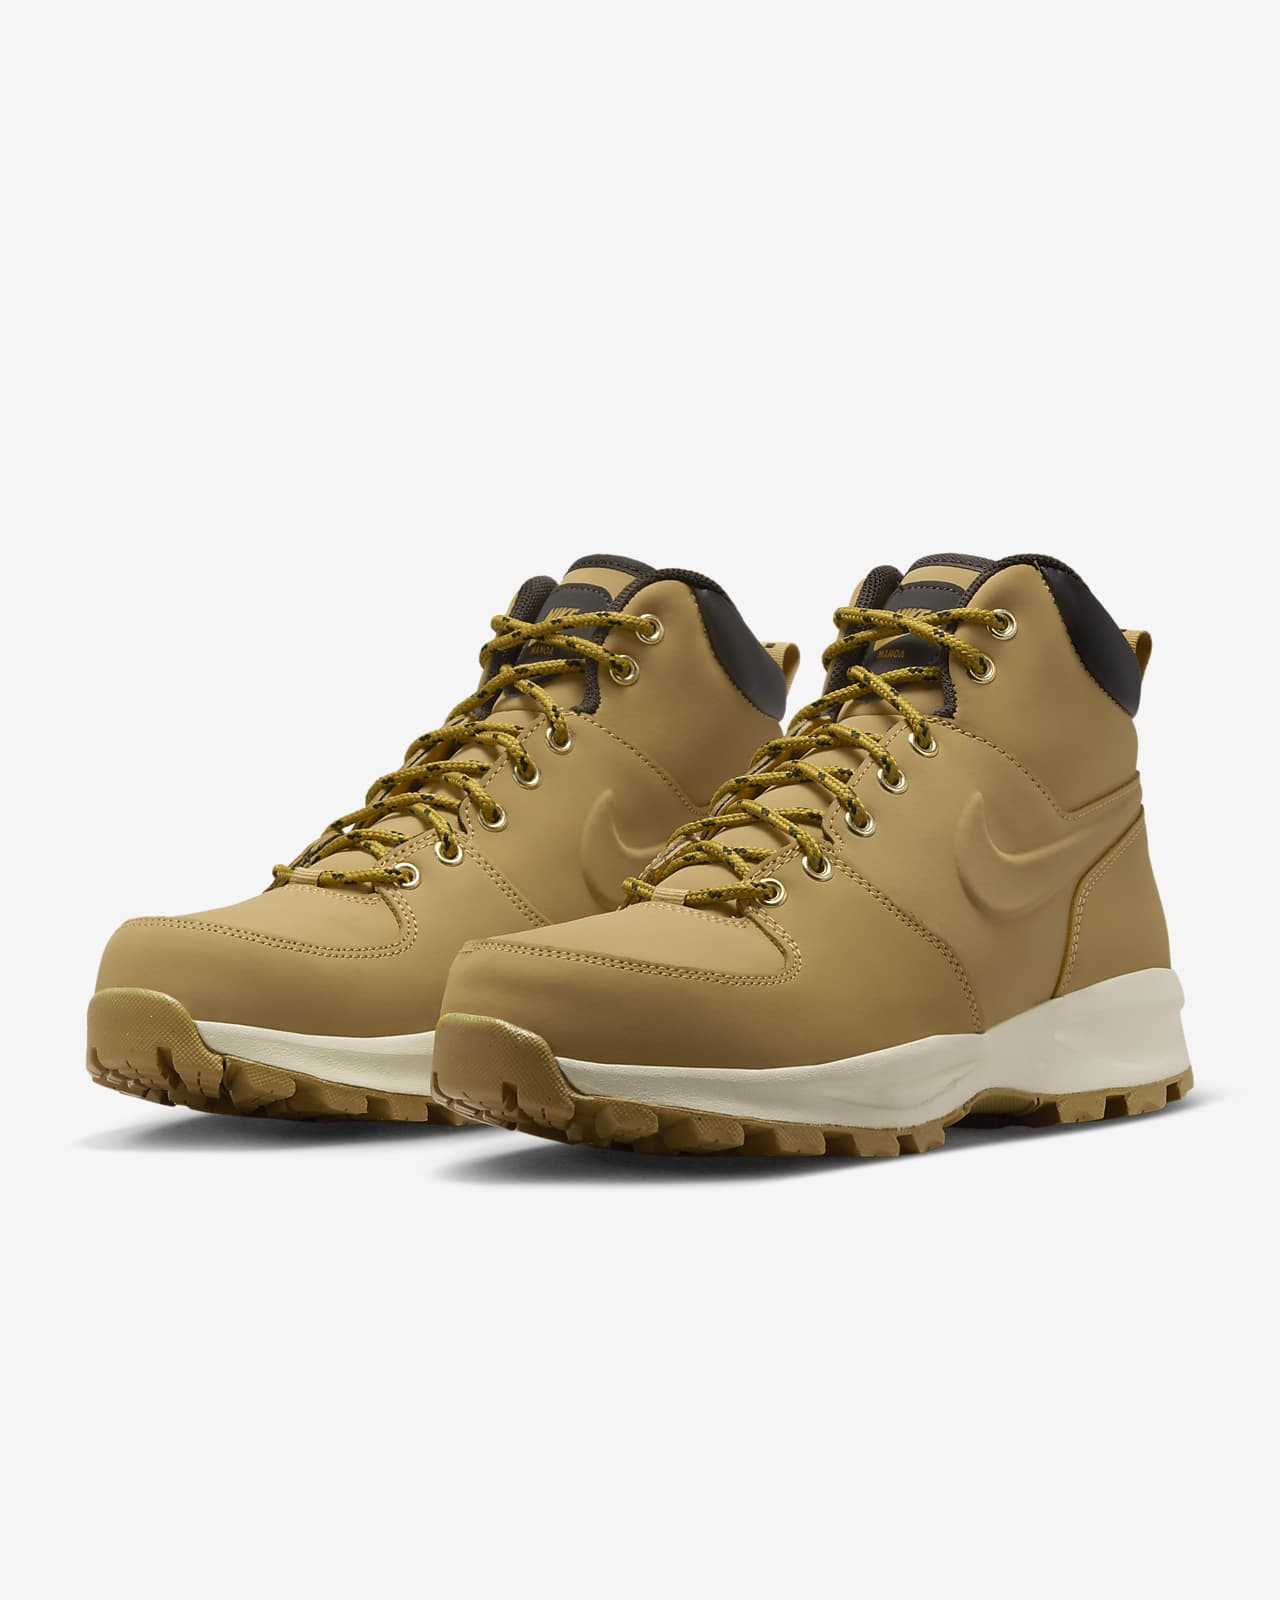 Nike Men\'s Leather Manoa Boots.